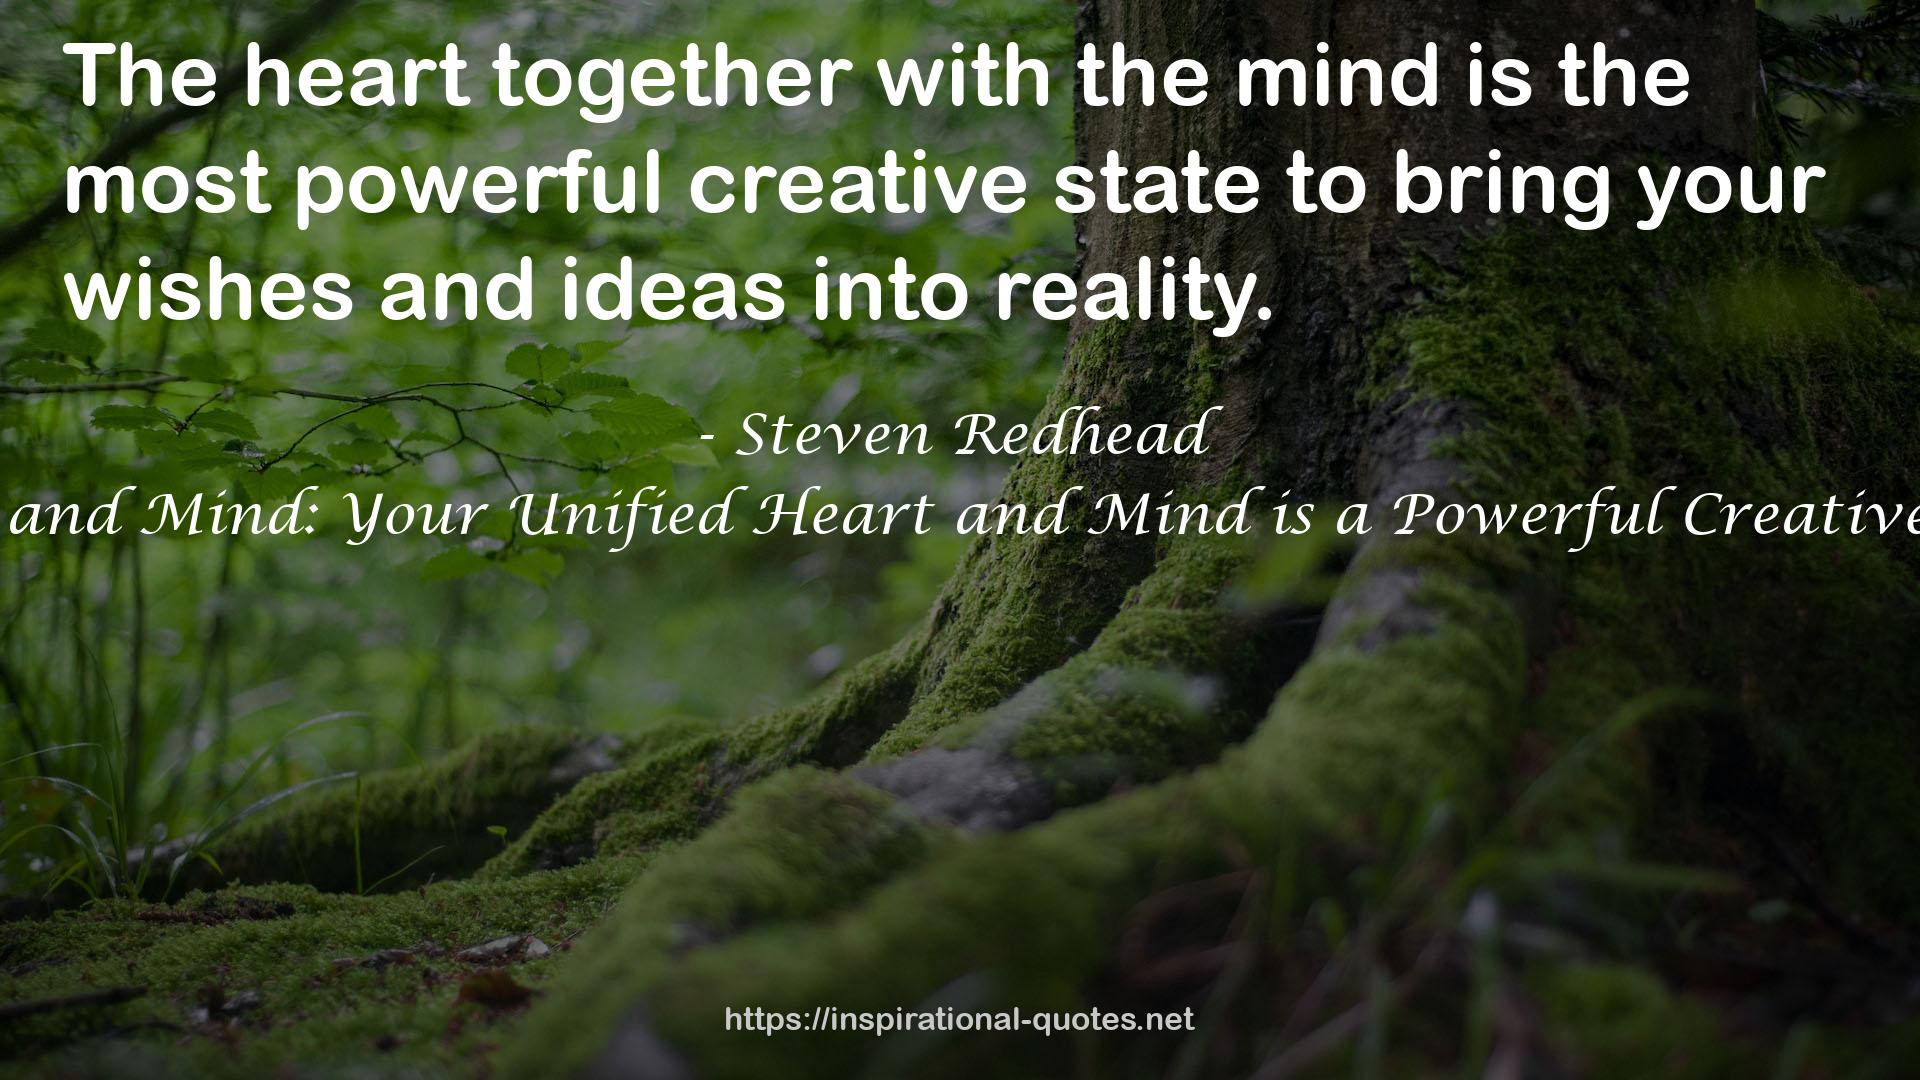 The most powerful creative state  QUOTES